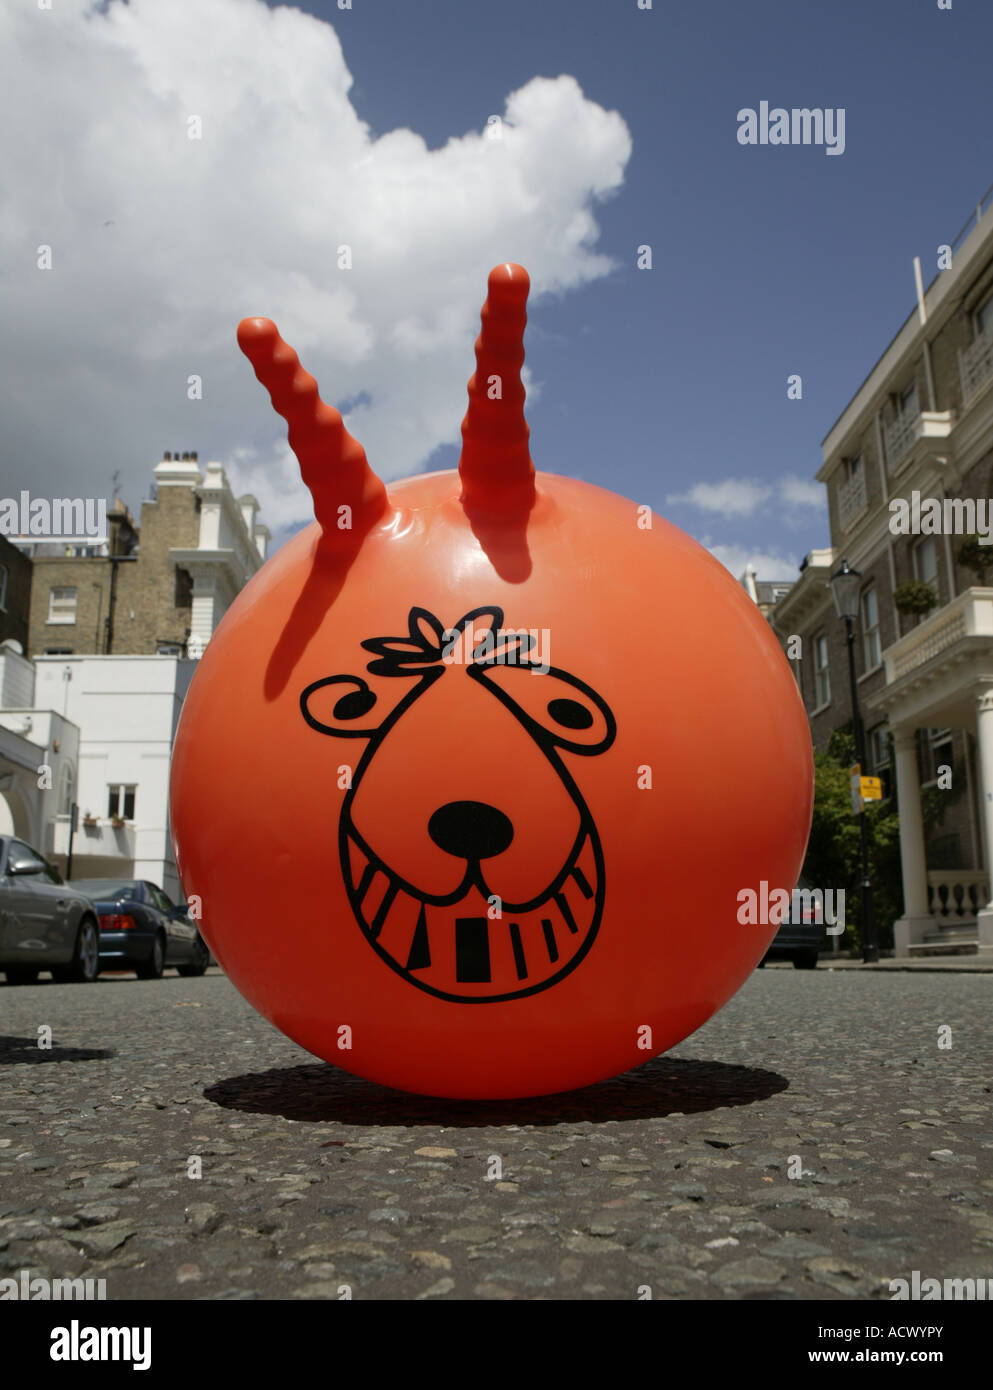 A Space Hopper in the street Stock Photo